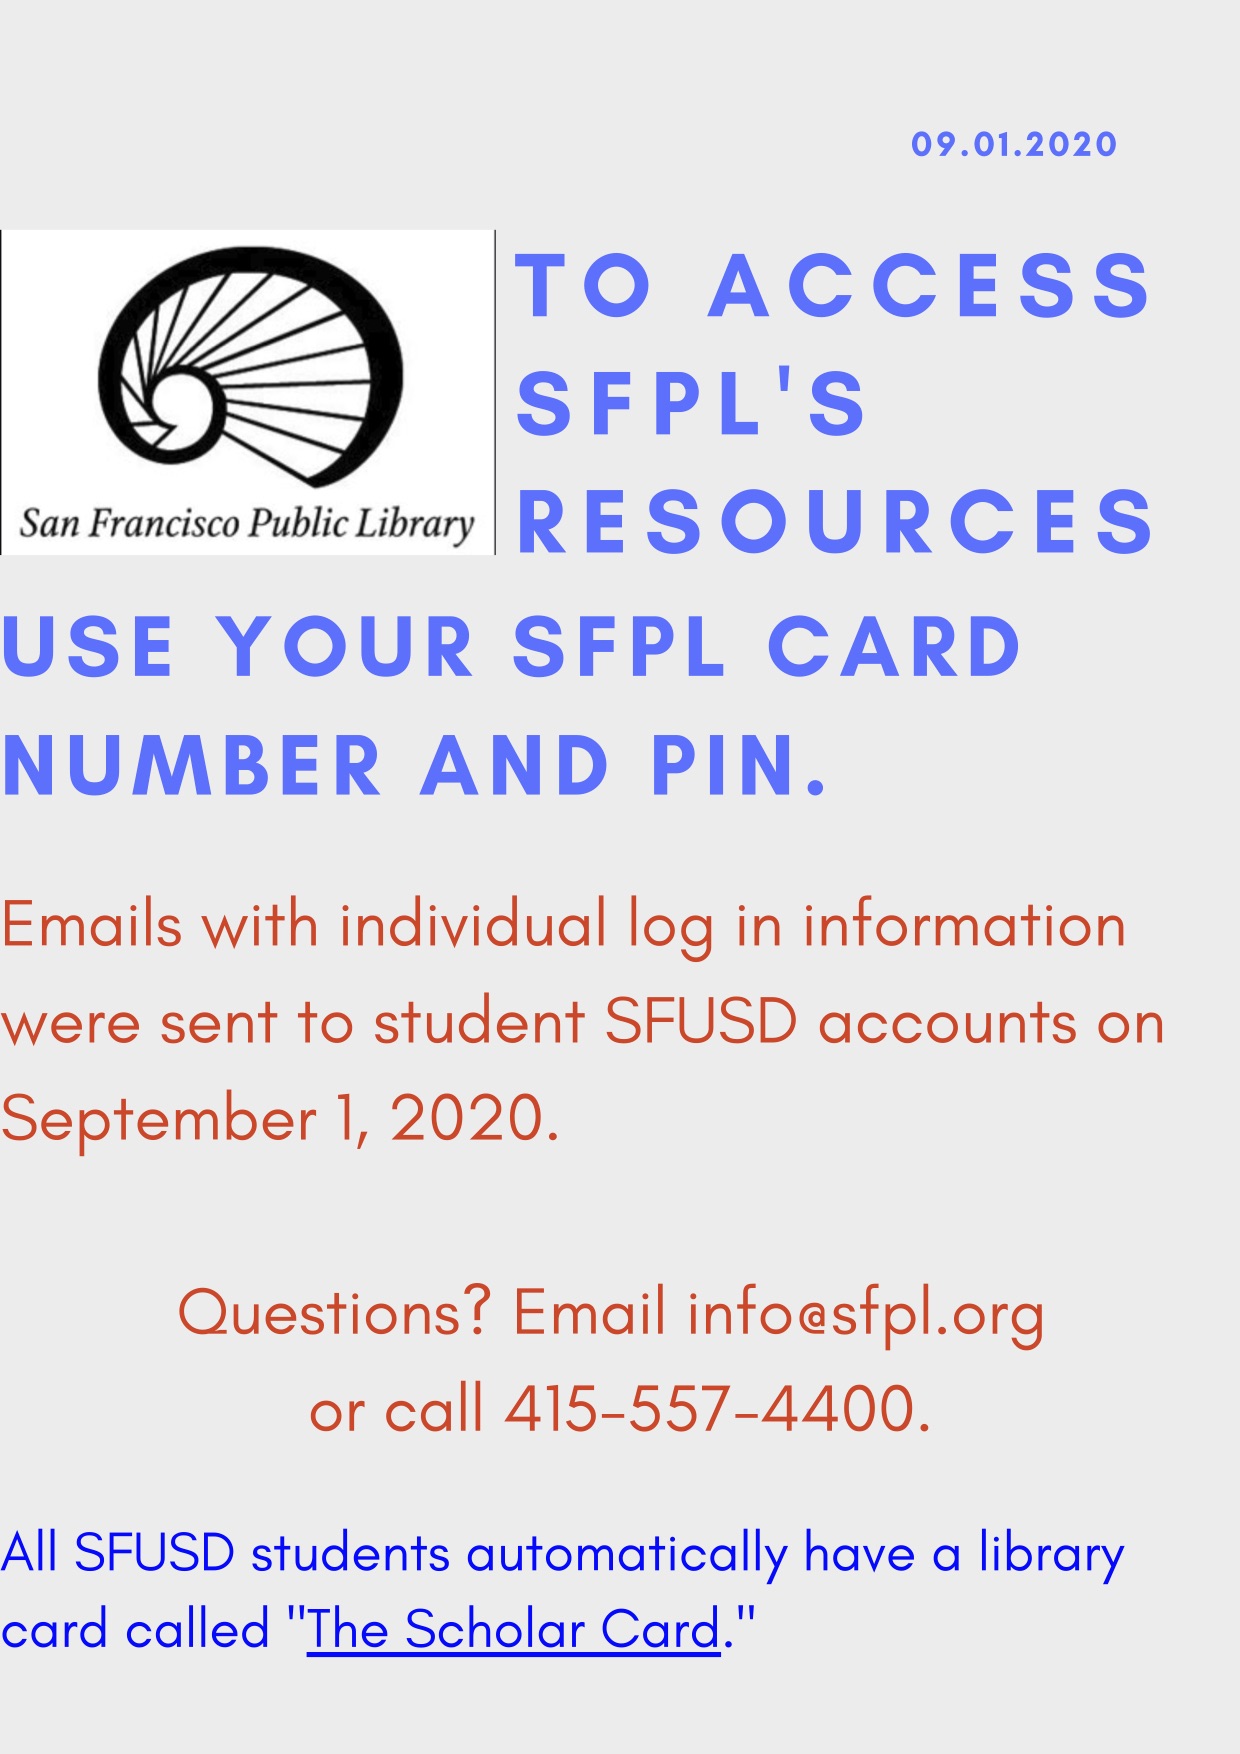 Library Card Information